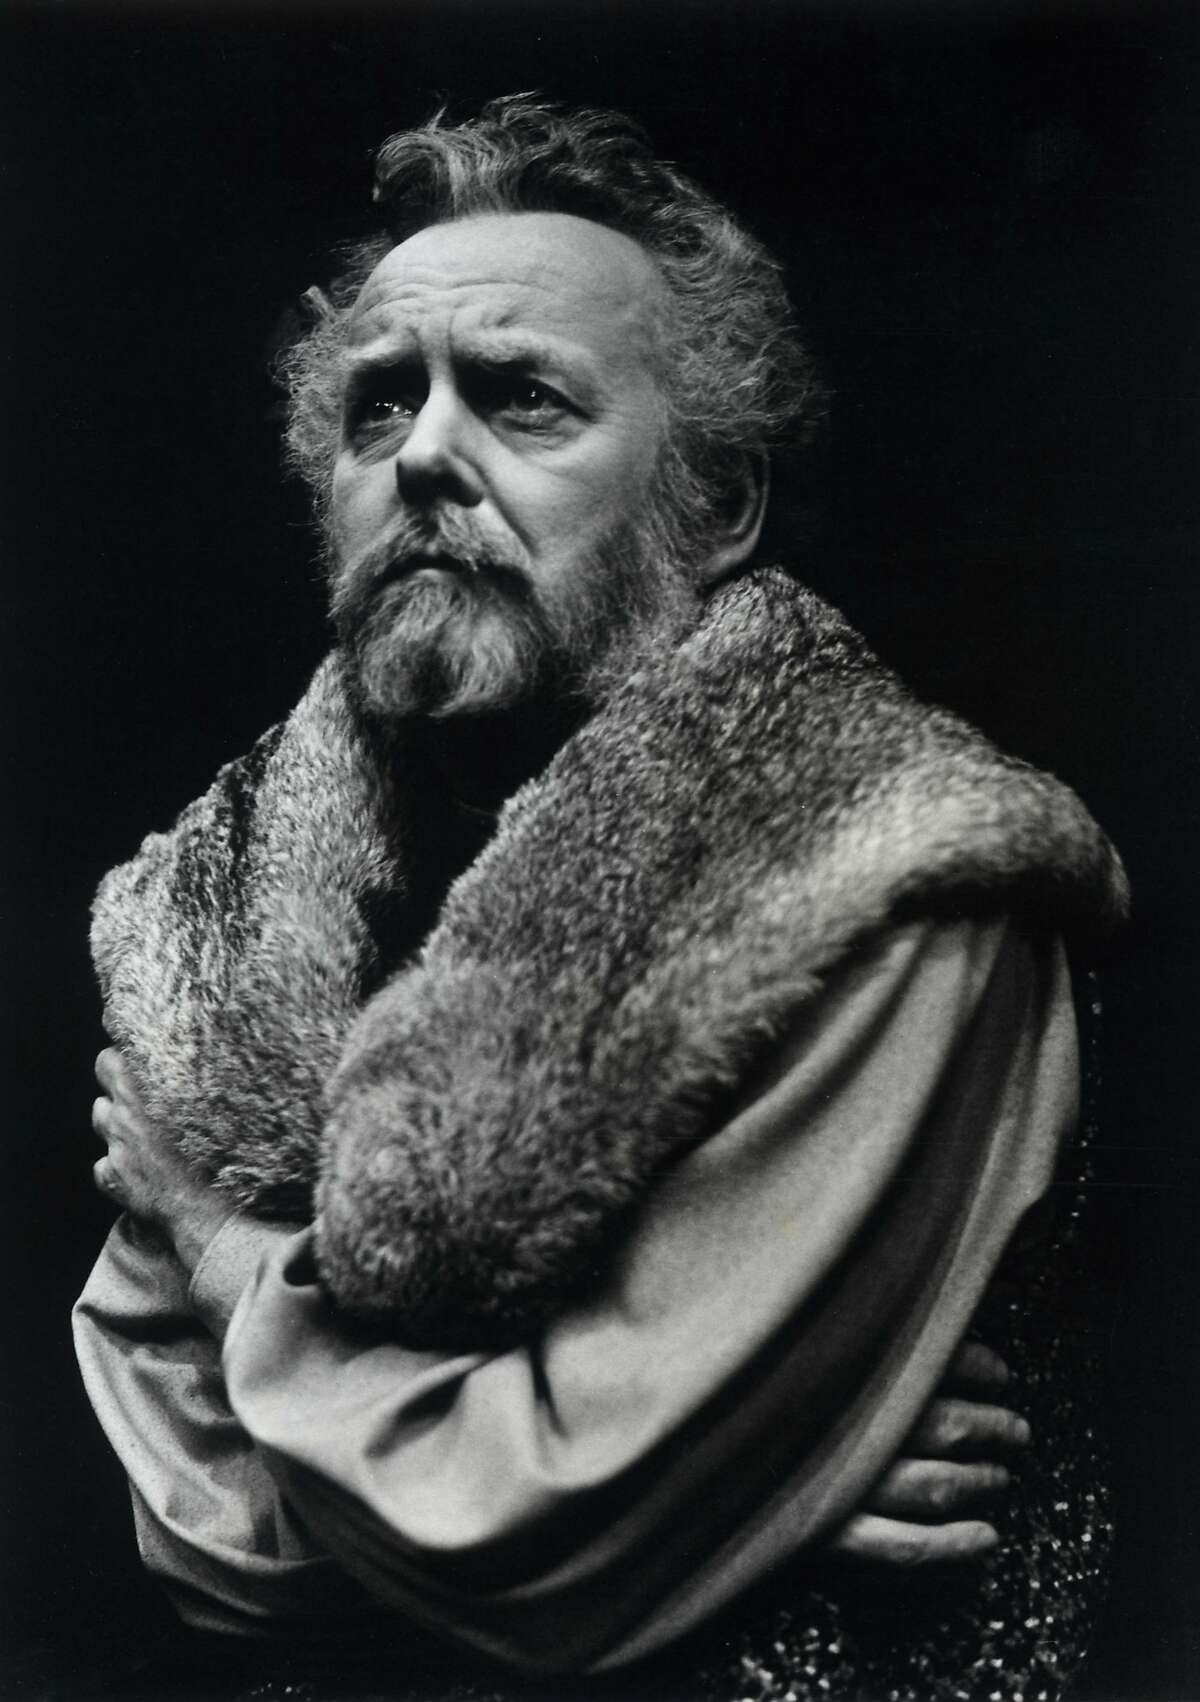 In this June 7, 1979 photo provided by Stratford Festival, Actor Douglas Rain appears as King Henry IV in this scene from The Second Part of Henry IV at Stratford's Festival Theatre in Stratford, Ontario. Rain, who played some of Shakespeare's most intriguing characters onstage but perhaps is best known for supplying the creepily calm voice of the rogue computer HAL in Stanley Kubrick's "2001: A Space Odyssey" has died. Douglas Rain was 90. (Robert C Ragsdale/Stratford Festival via AP)